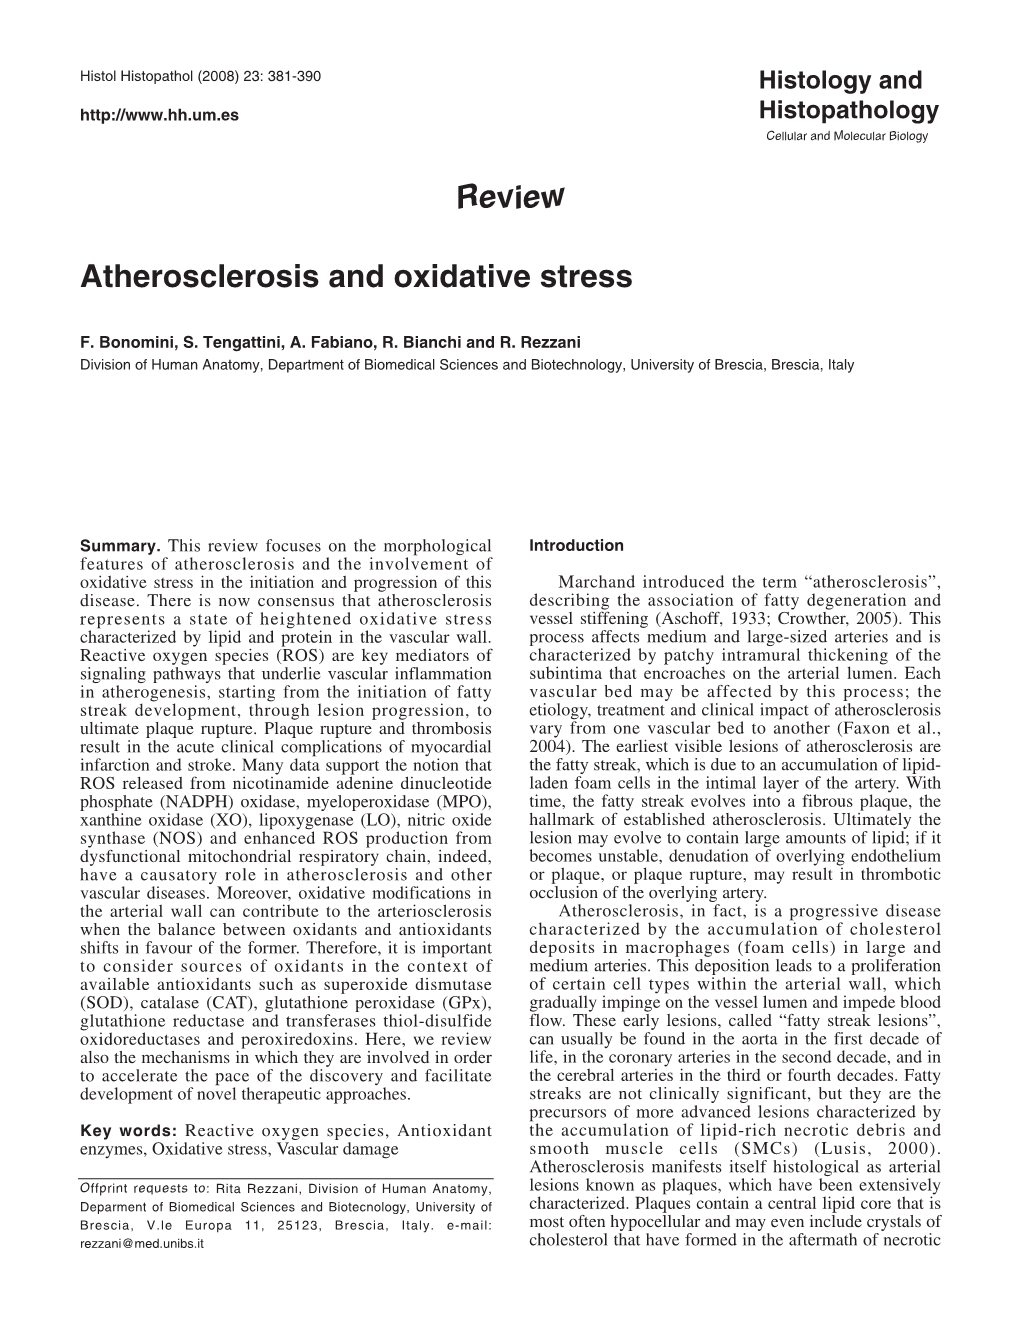 Review Atherosclerosis and Oxidative Stress